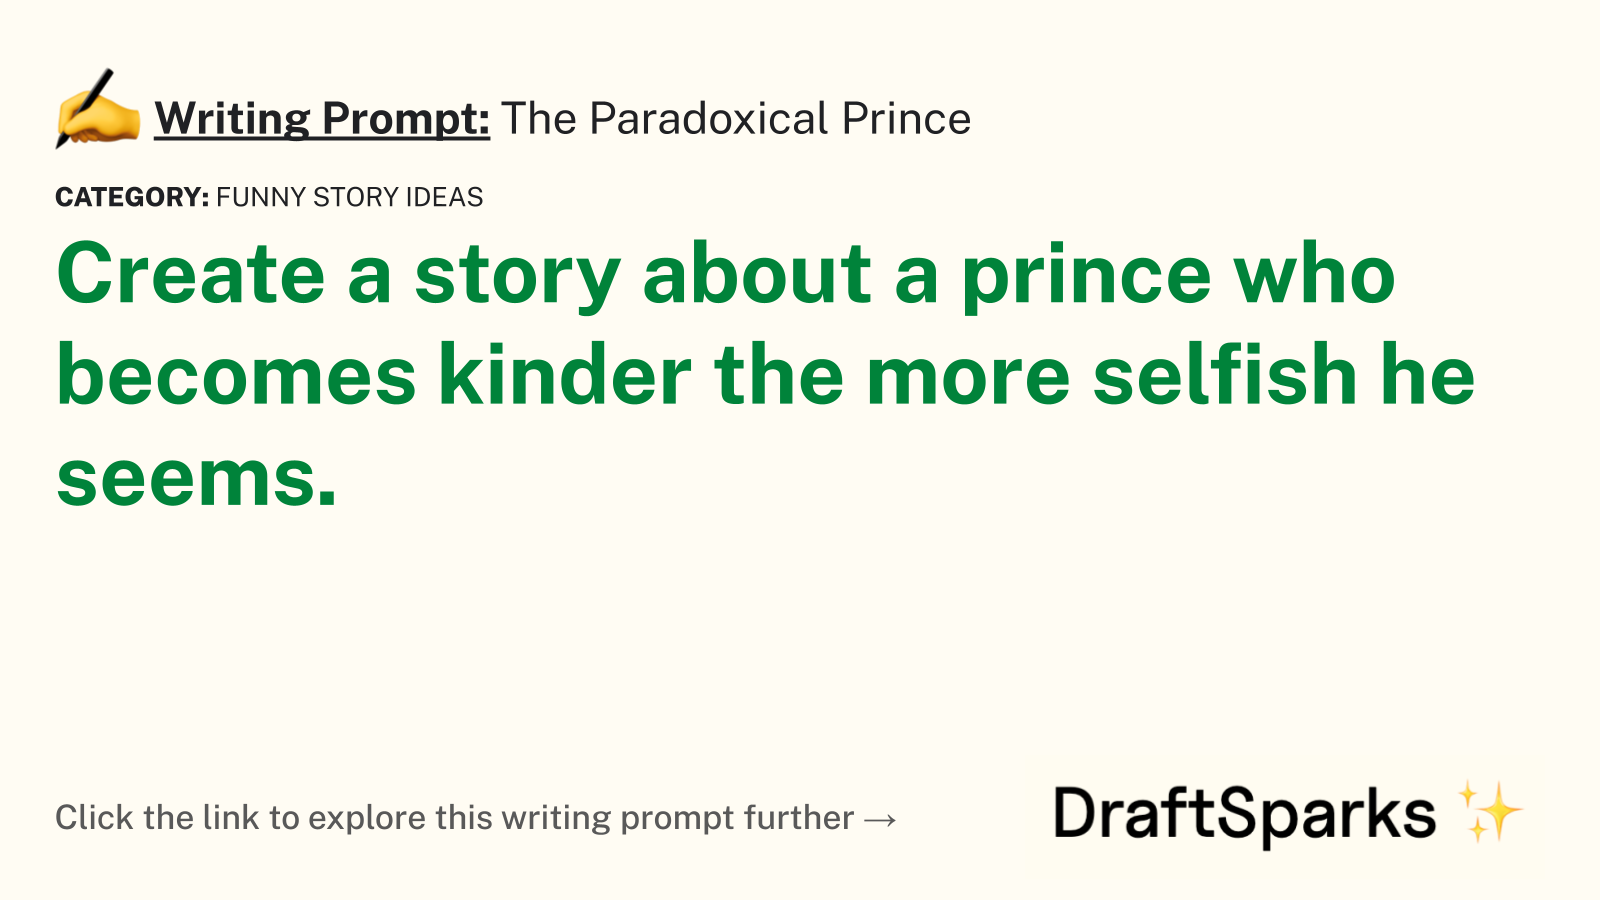 The Paradoxical Prince